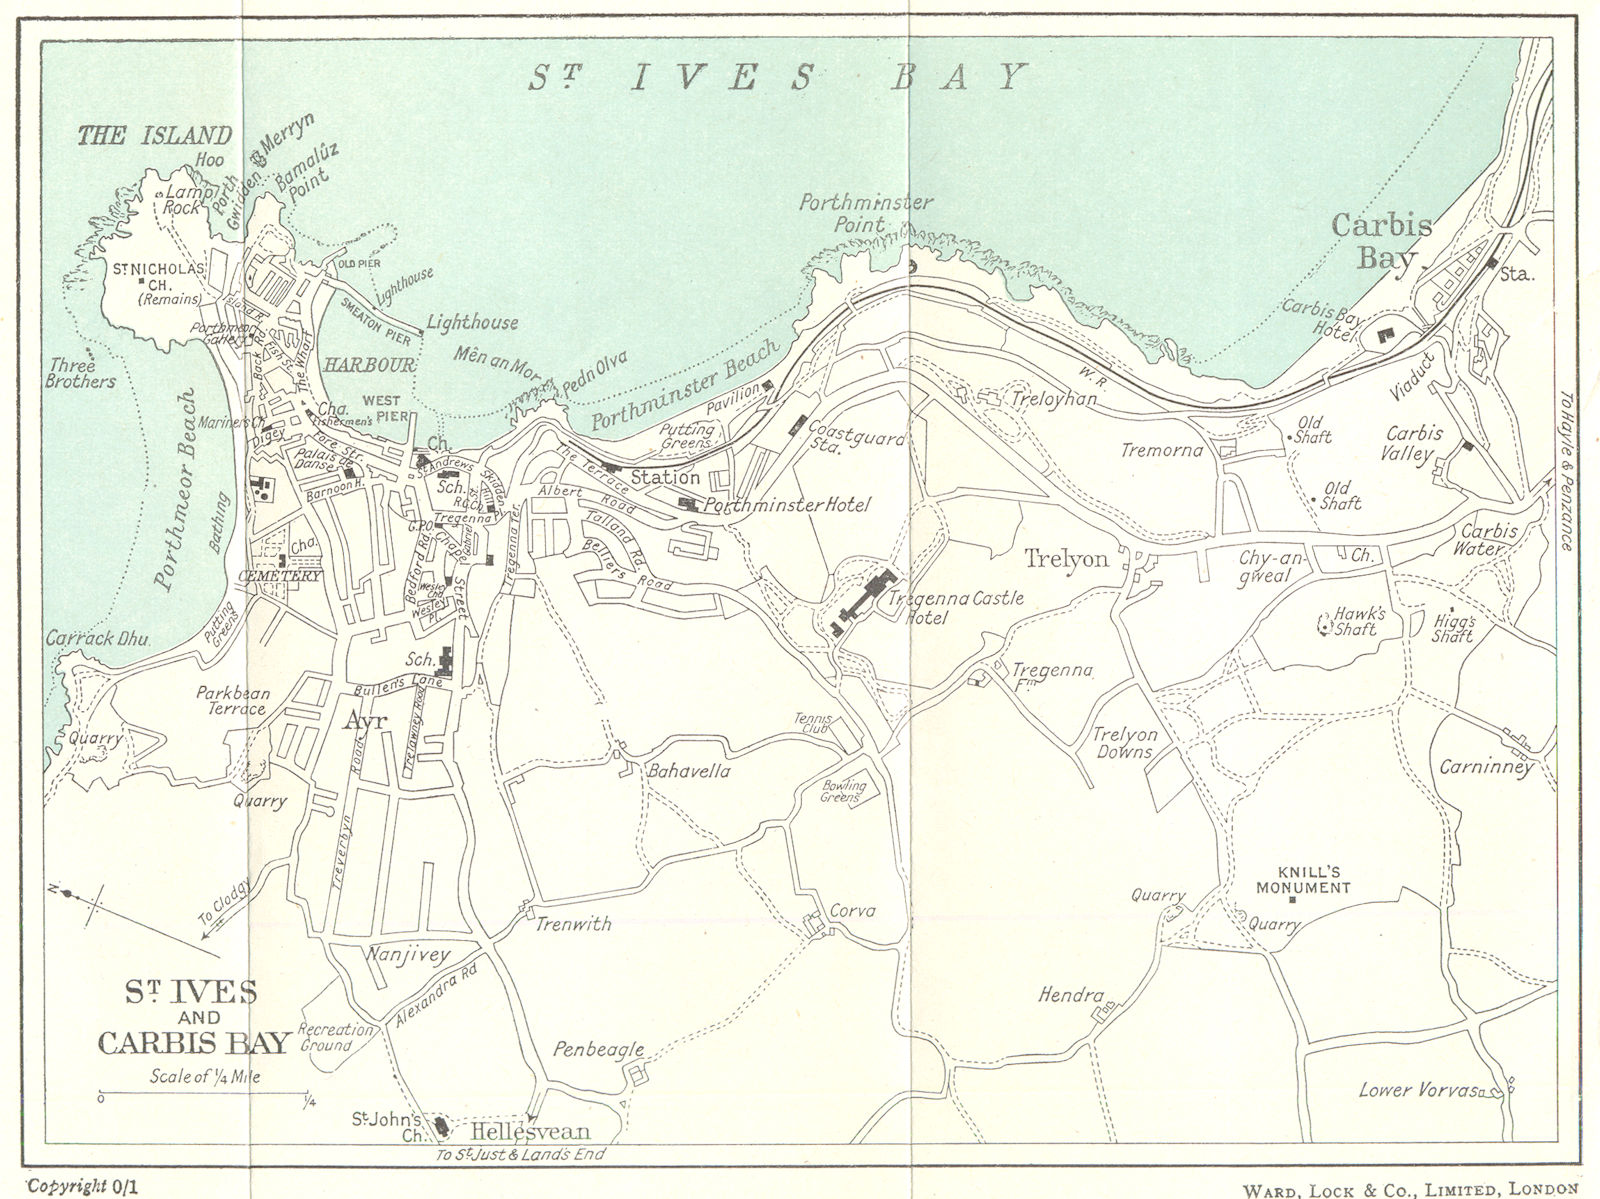 ST. IVES AND CARBIS BAY vintage town/city plan. Cornwall. WARD LOCK 1952 map